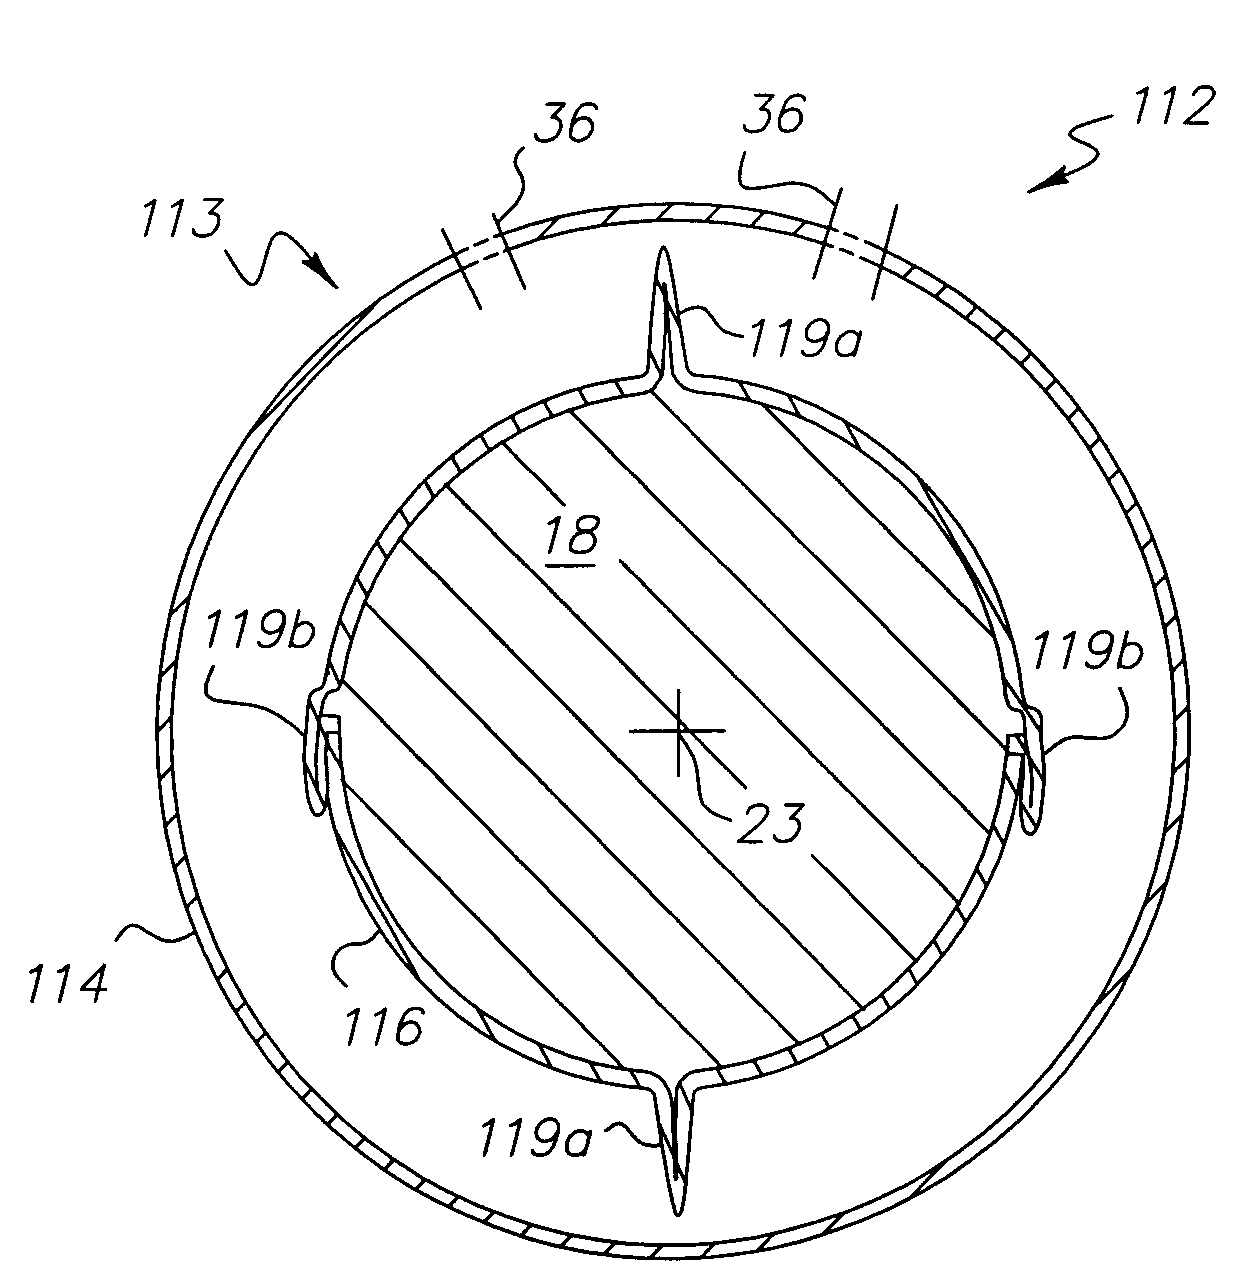 Ring-shaped cuff for measurement of blood pressure